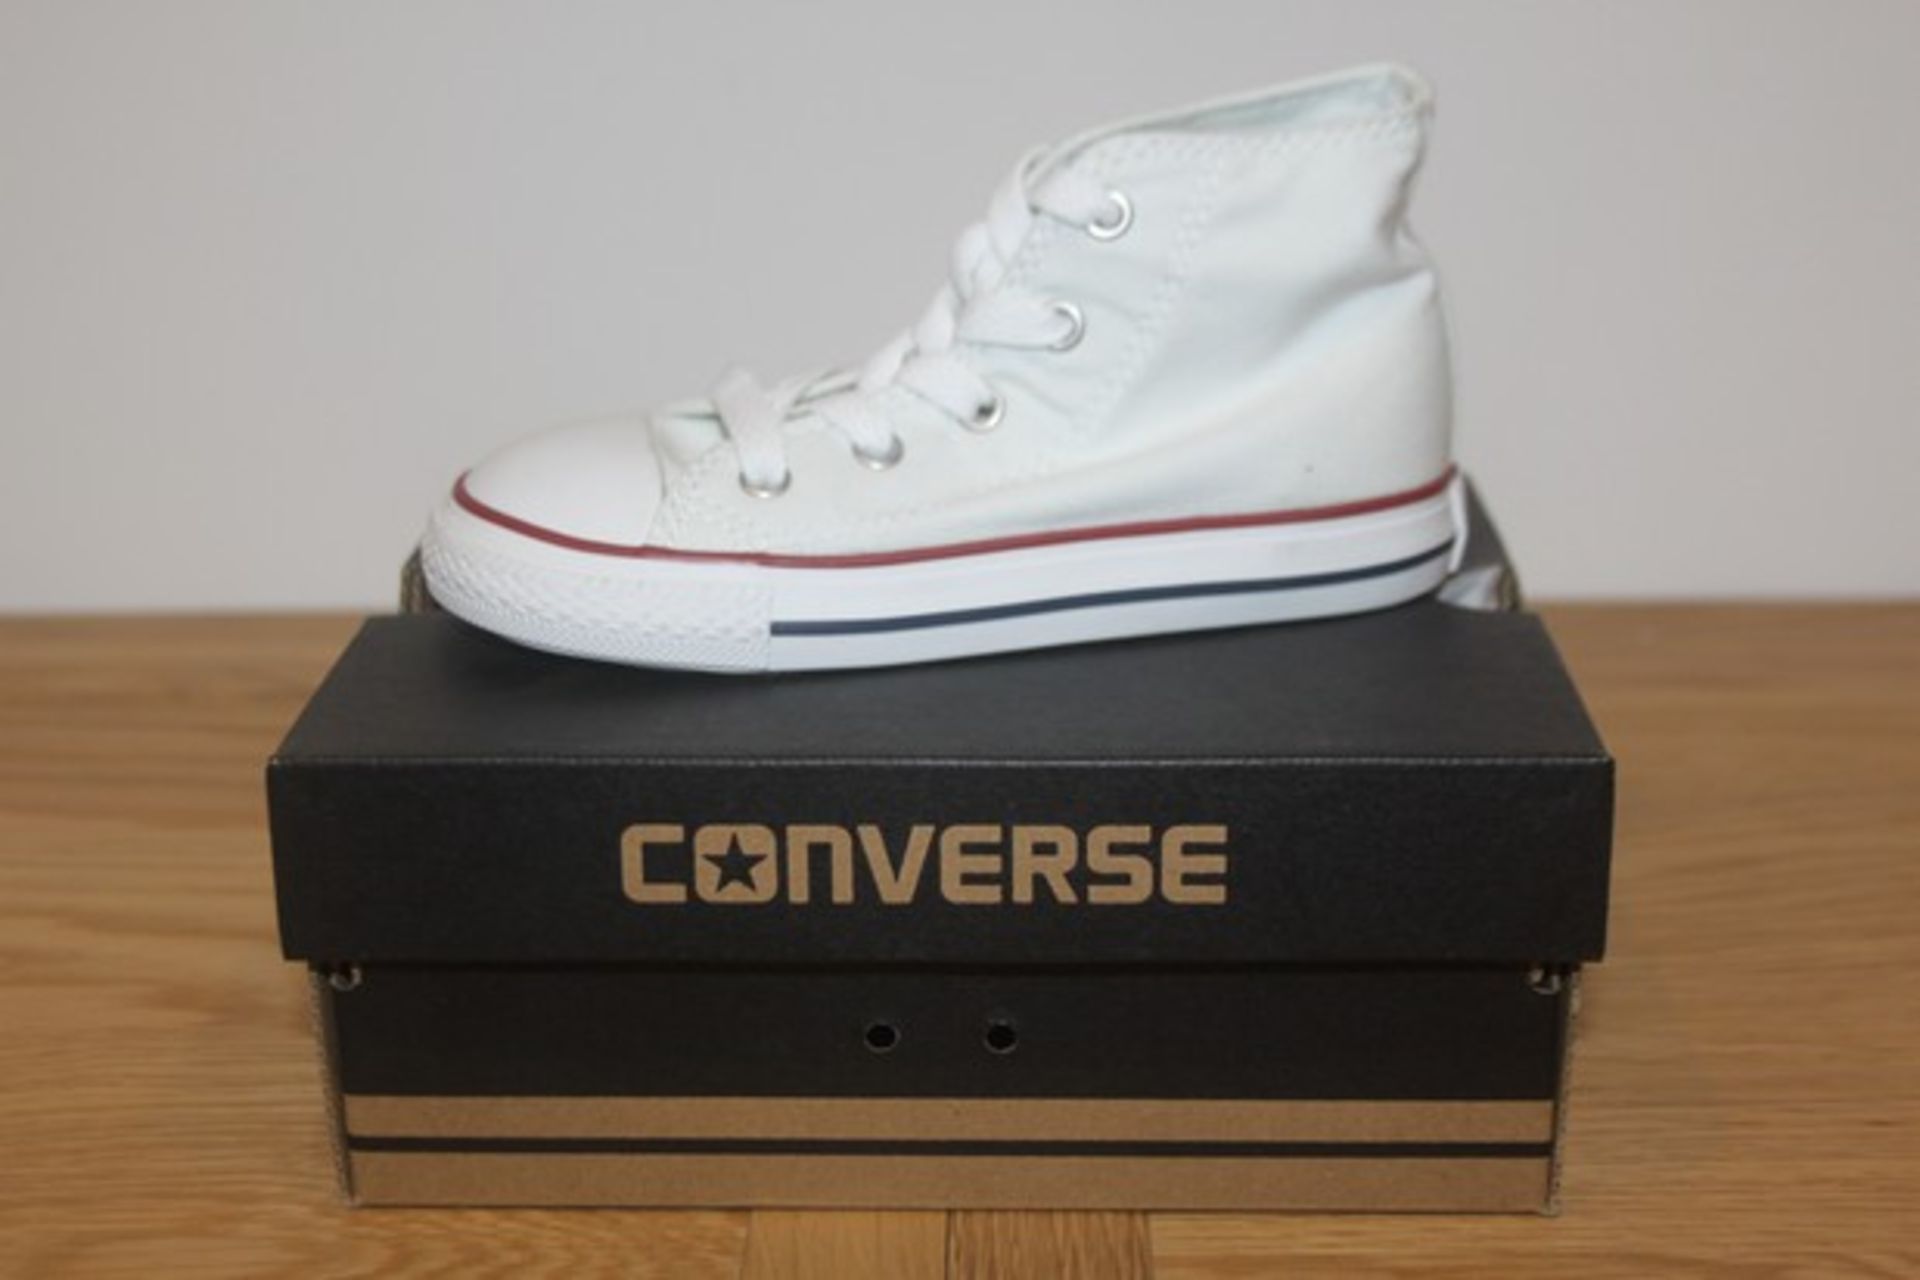 BOXED BRAND NEW CONVERSE ALL STAR SHOES SIZE 9 RRP £30 (DSSALVAGE)